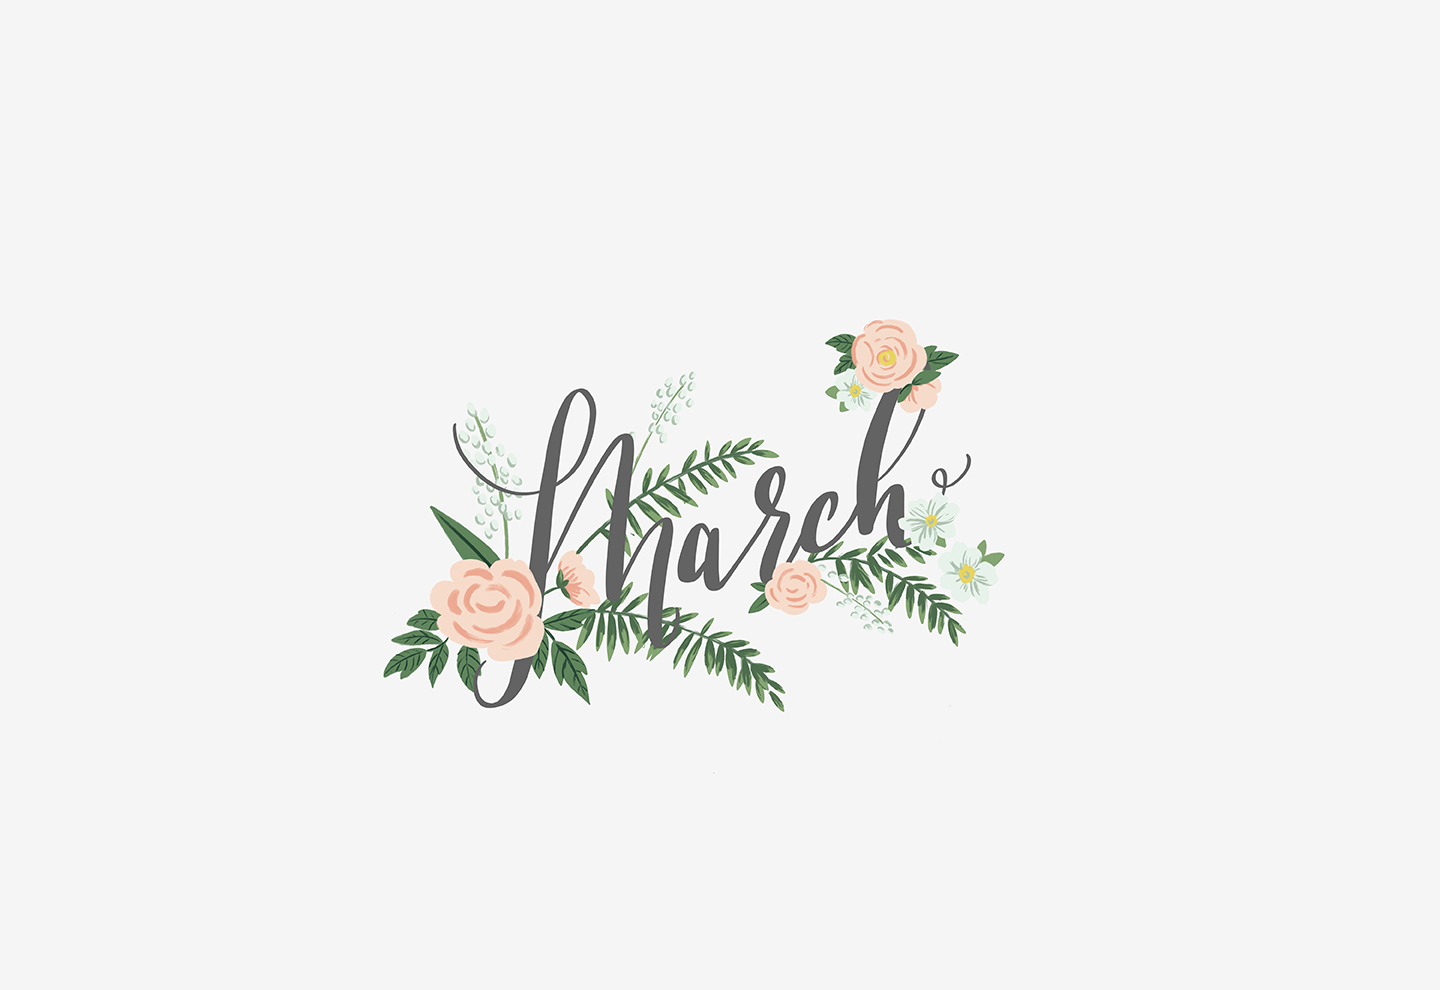 Free Downloadable Tech Backgrounds for March 2019  Desktop wallpapers  backgrounds Desktop wallpaper Laptop wallpaper desktop wallpapers